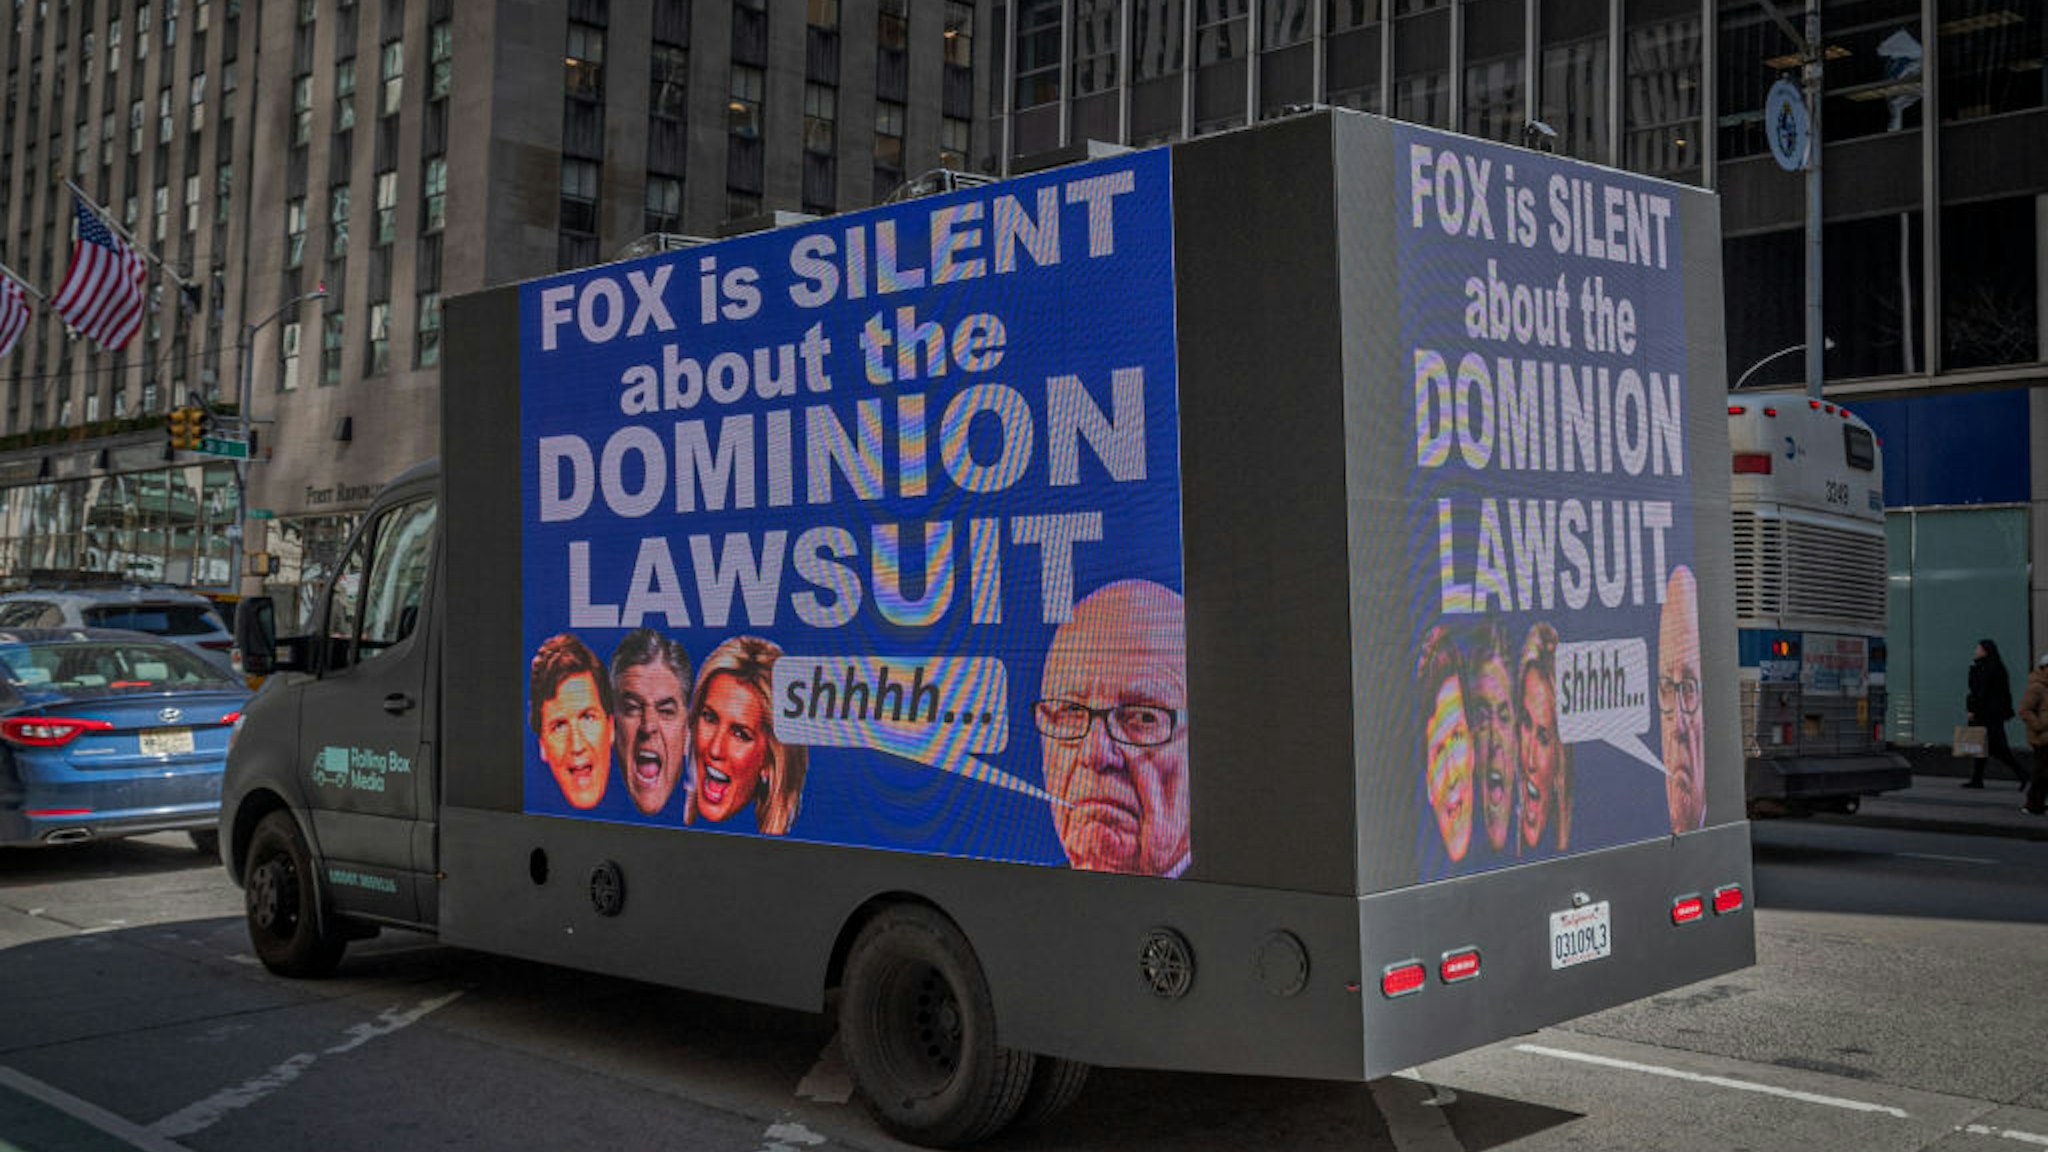 MANHATTAN, NEW YORK, UNITED STATES - 2023/03/07: A billboard truck seen outside Fox News HQ. Members of the activist groups Truth Tuesdays and Rise and Resist gathered at the weekly FOX LIES DEMOCRACY DIES event outside the NewsCorp Building in Manhattan, this time with a billboard truck exposing Fox lies. Activists are pushing back against -what they call- Rupert Murdoch's right-wing propaganda machine. As Fox News lies keep getting exposed by filings in the Dominion Voting Systems defamation lawsuit. (Photo by Erik McGregor/LightRocket via Getty Images)